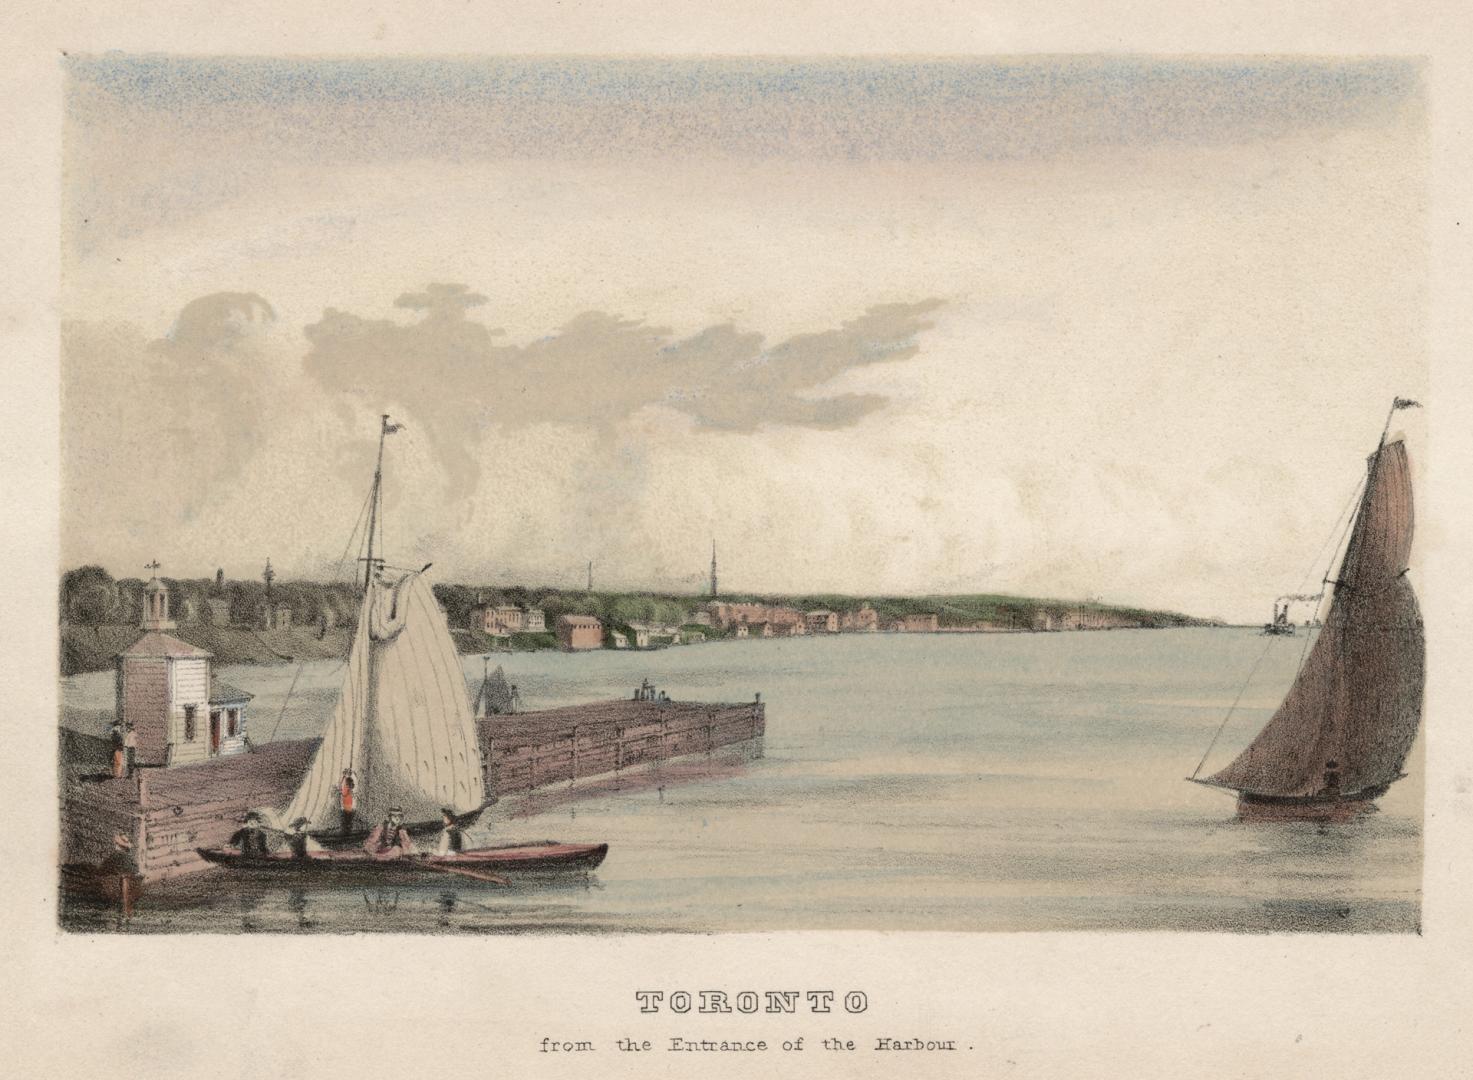 Image shows a lake view with a few sail boats on it and some houses in the background.